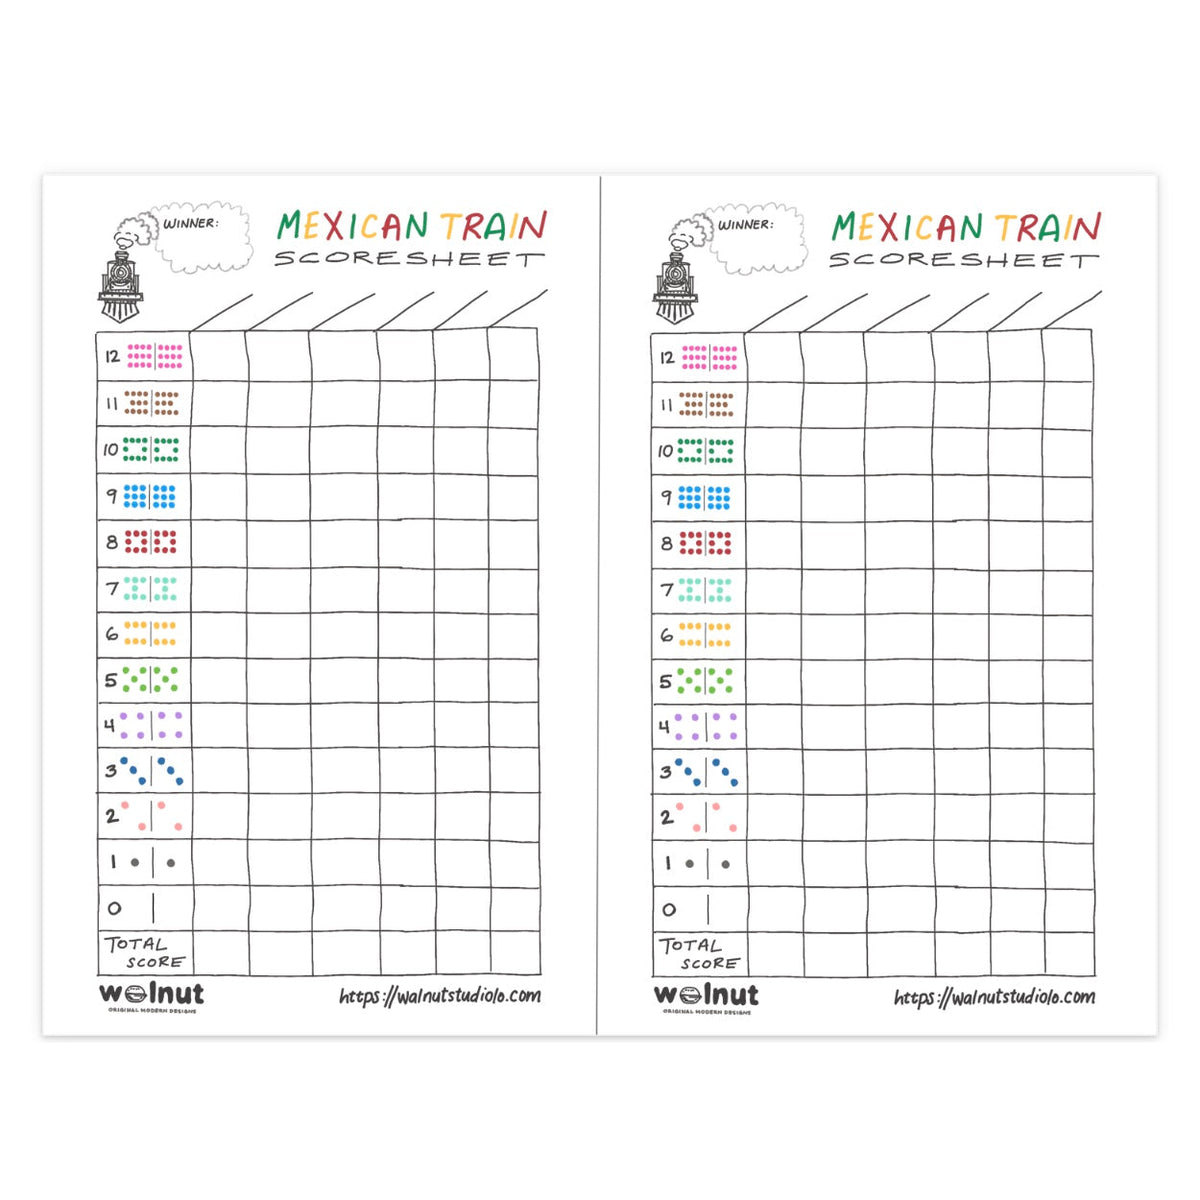 Example of free printable Mexican Train scoresheet